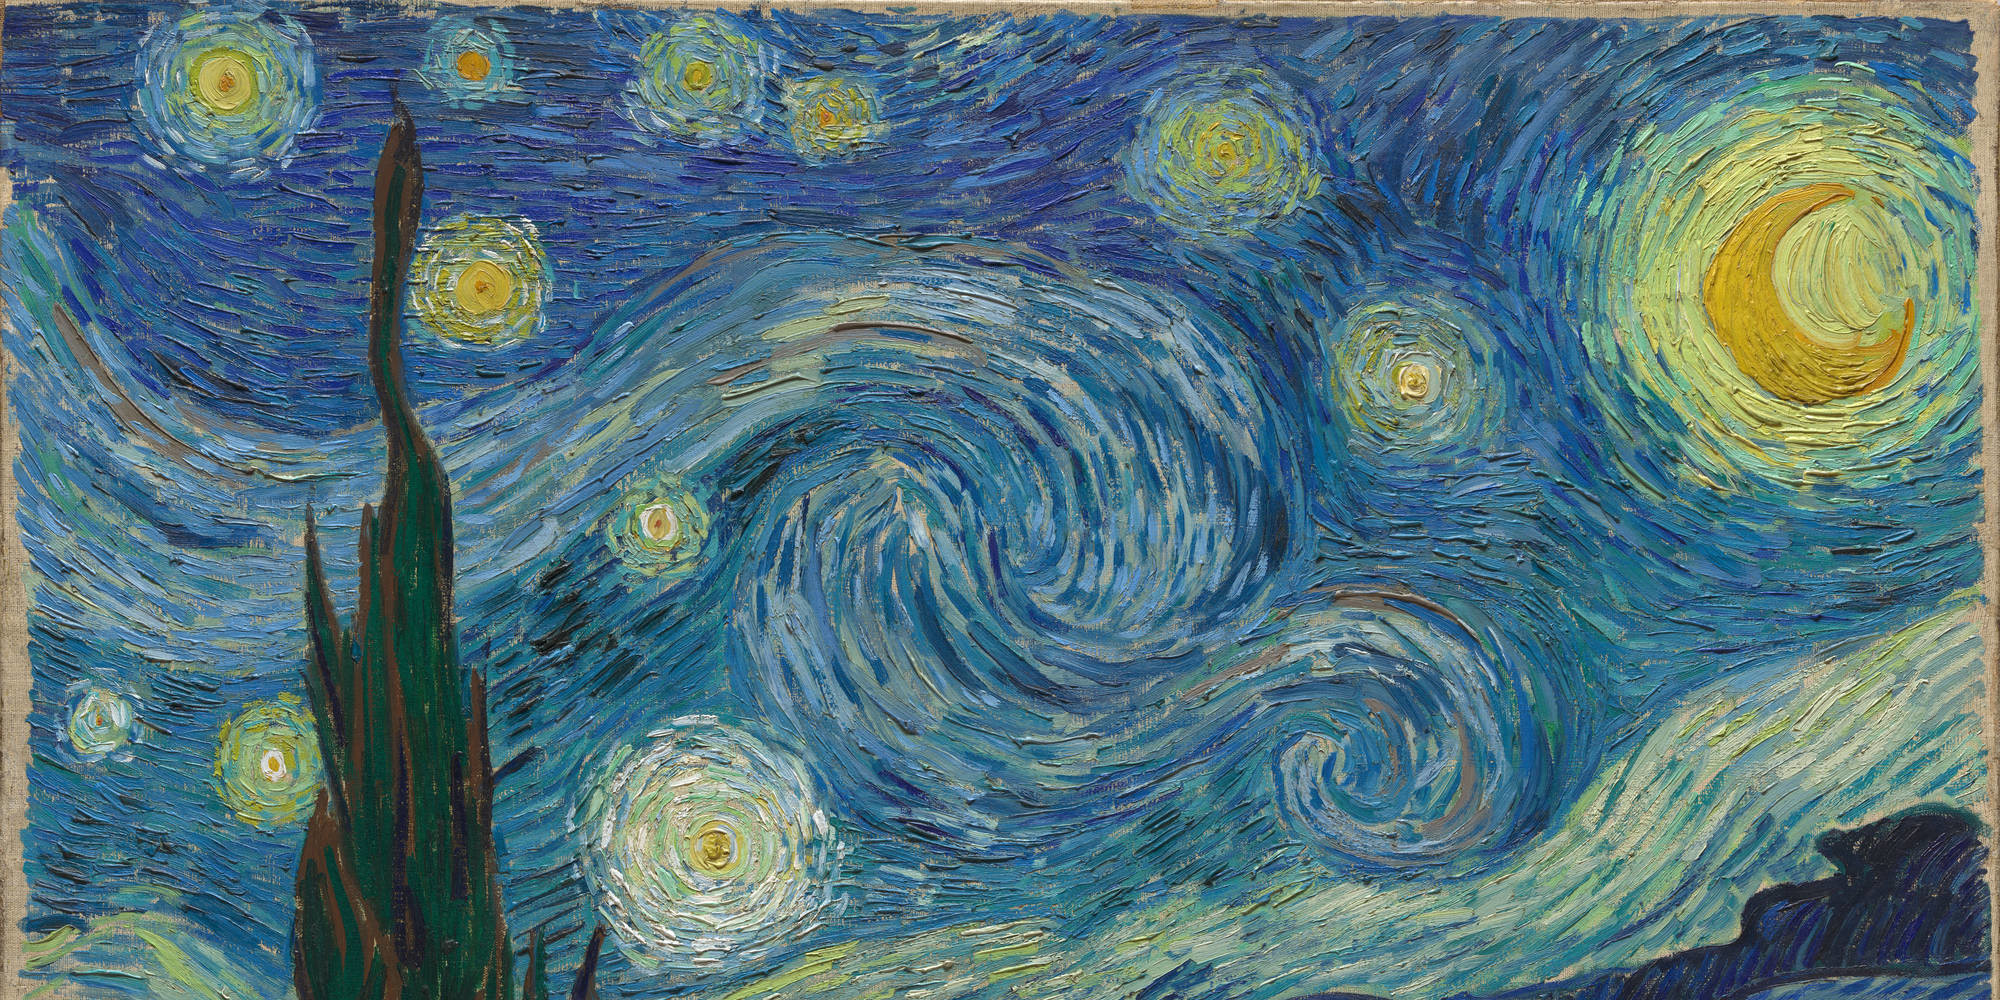 Vincent van Gogh. The Starry Night. 1889. Oil on canvas, 29 × 36 ¼” (73.7 × 92.1 cm). Acquired through the Lillie P. Bliss Bequest (by exchange). Conservation was made possible by the Bank of America Art Conservation Project